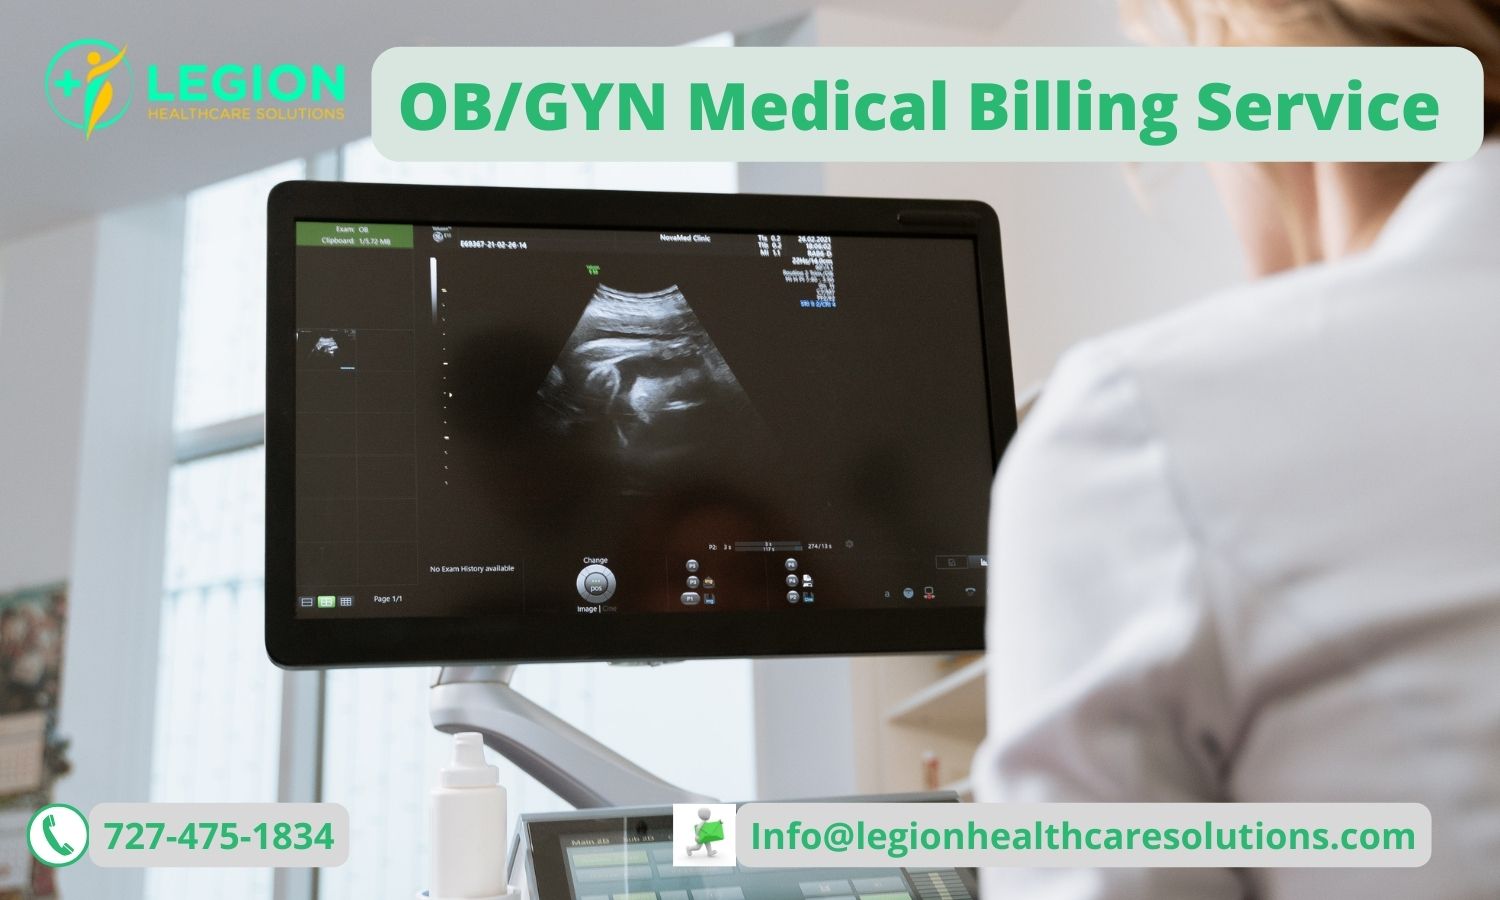 OB-GYN Medical Billing and Coding Services - Legion Healthcare Solutions